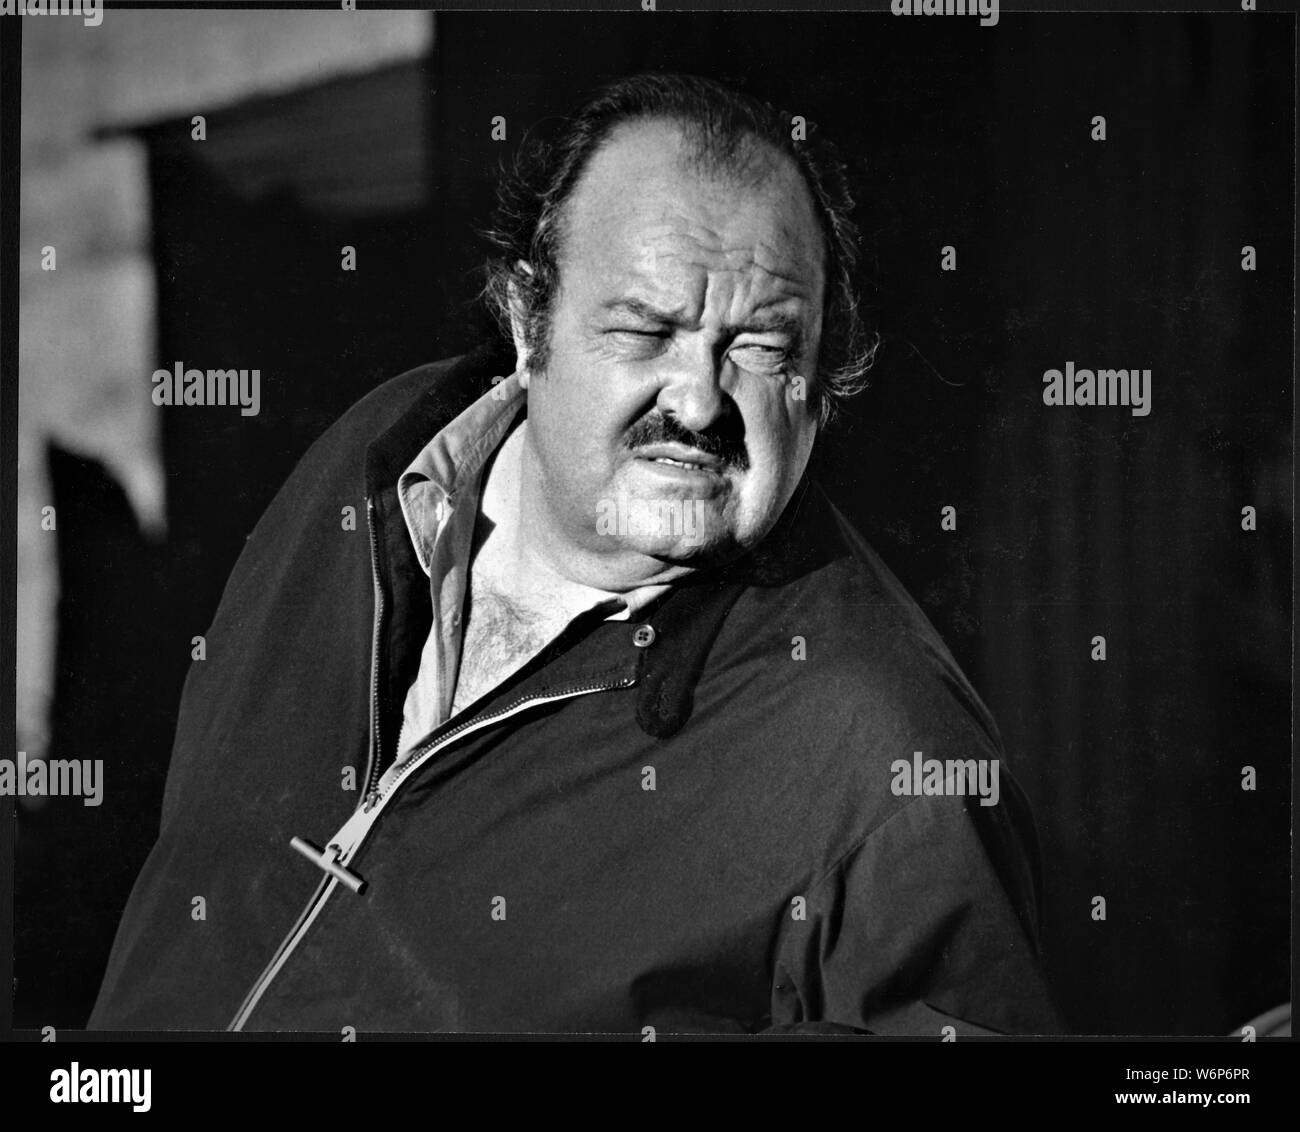 William Conrad (September 27, 1920 – February 11, 1994) was an American World War II fighter pilot, actor, producer, and director whose career spanned five decades in radio, film, and television, peaking in popularity when he starred in the detective series Cannon (1971–1976). He created the role of Marshal Matt Dillon for the radio series Gunsmoke (1952–1961) and narrated the television adventures of Rocky and Bullwinkle (1959–1964) and The Fugitive (1963–1967).  This is shot in Randsburgh California high desert for 'Cannon' TV series. Stock Photo